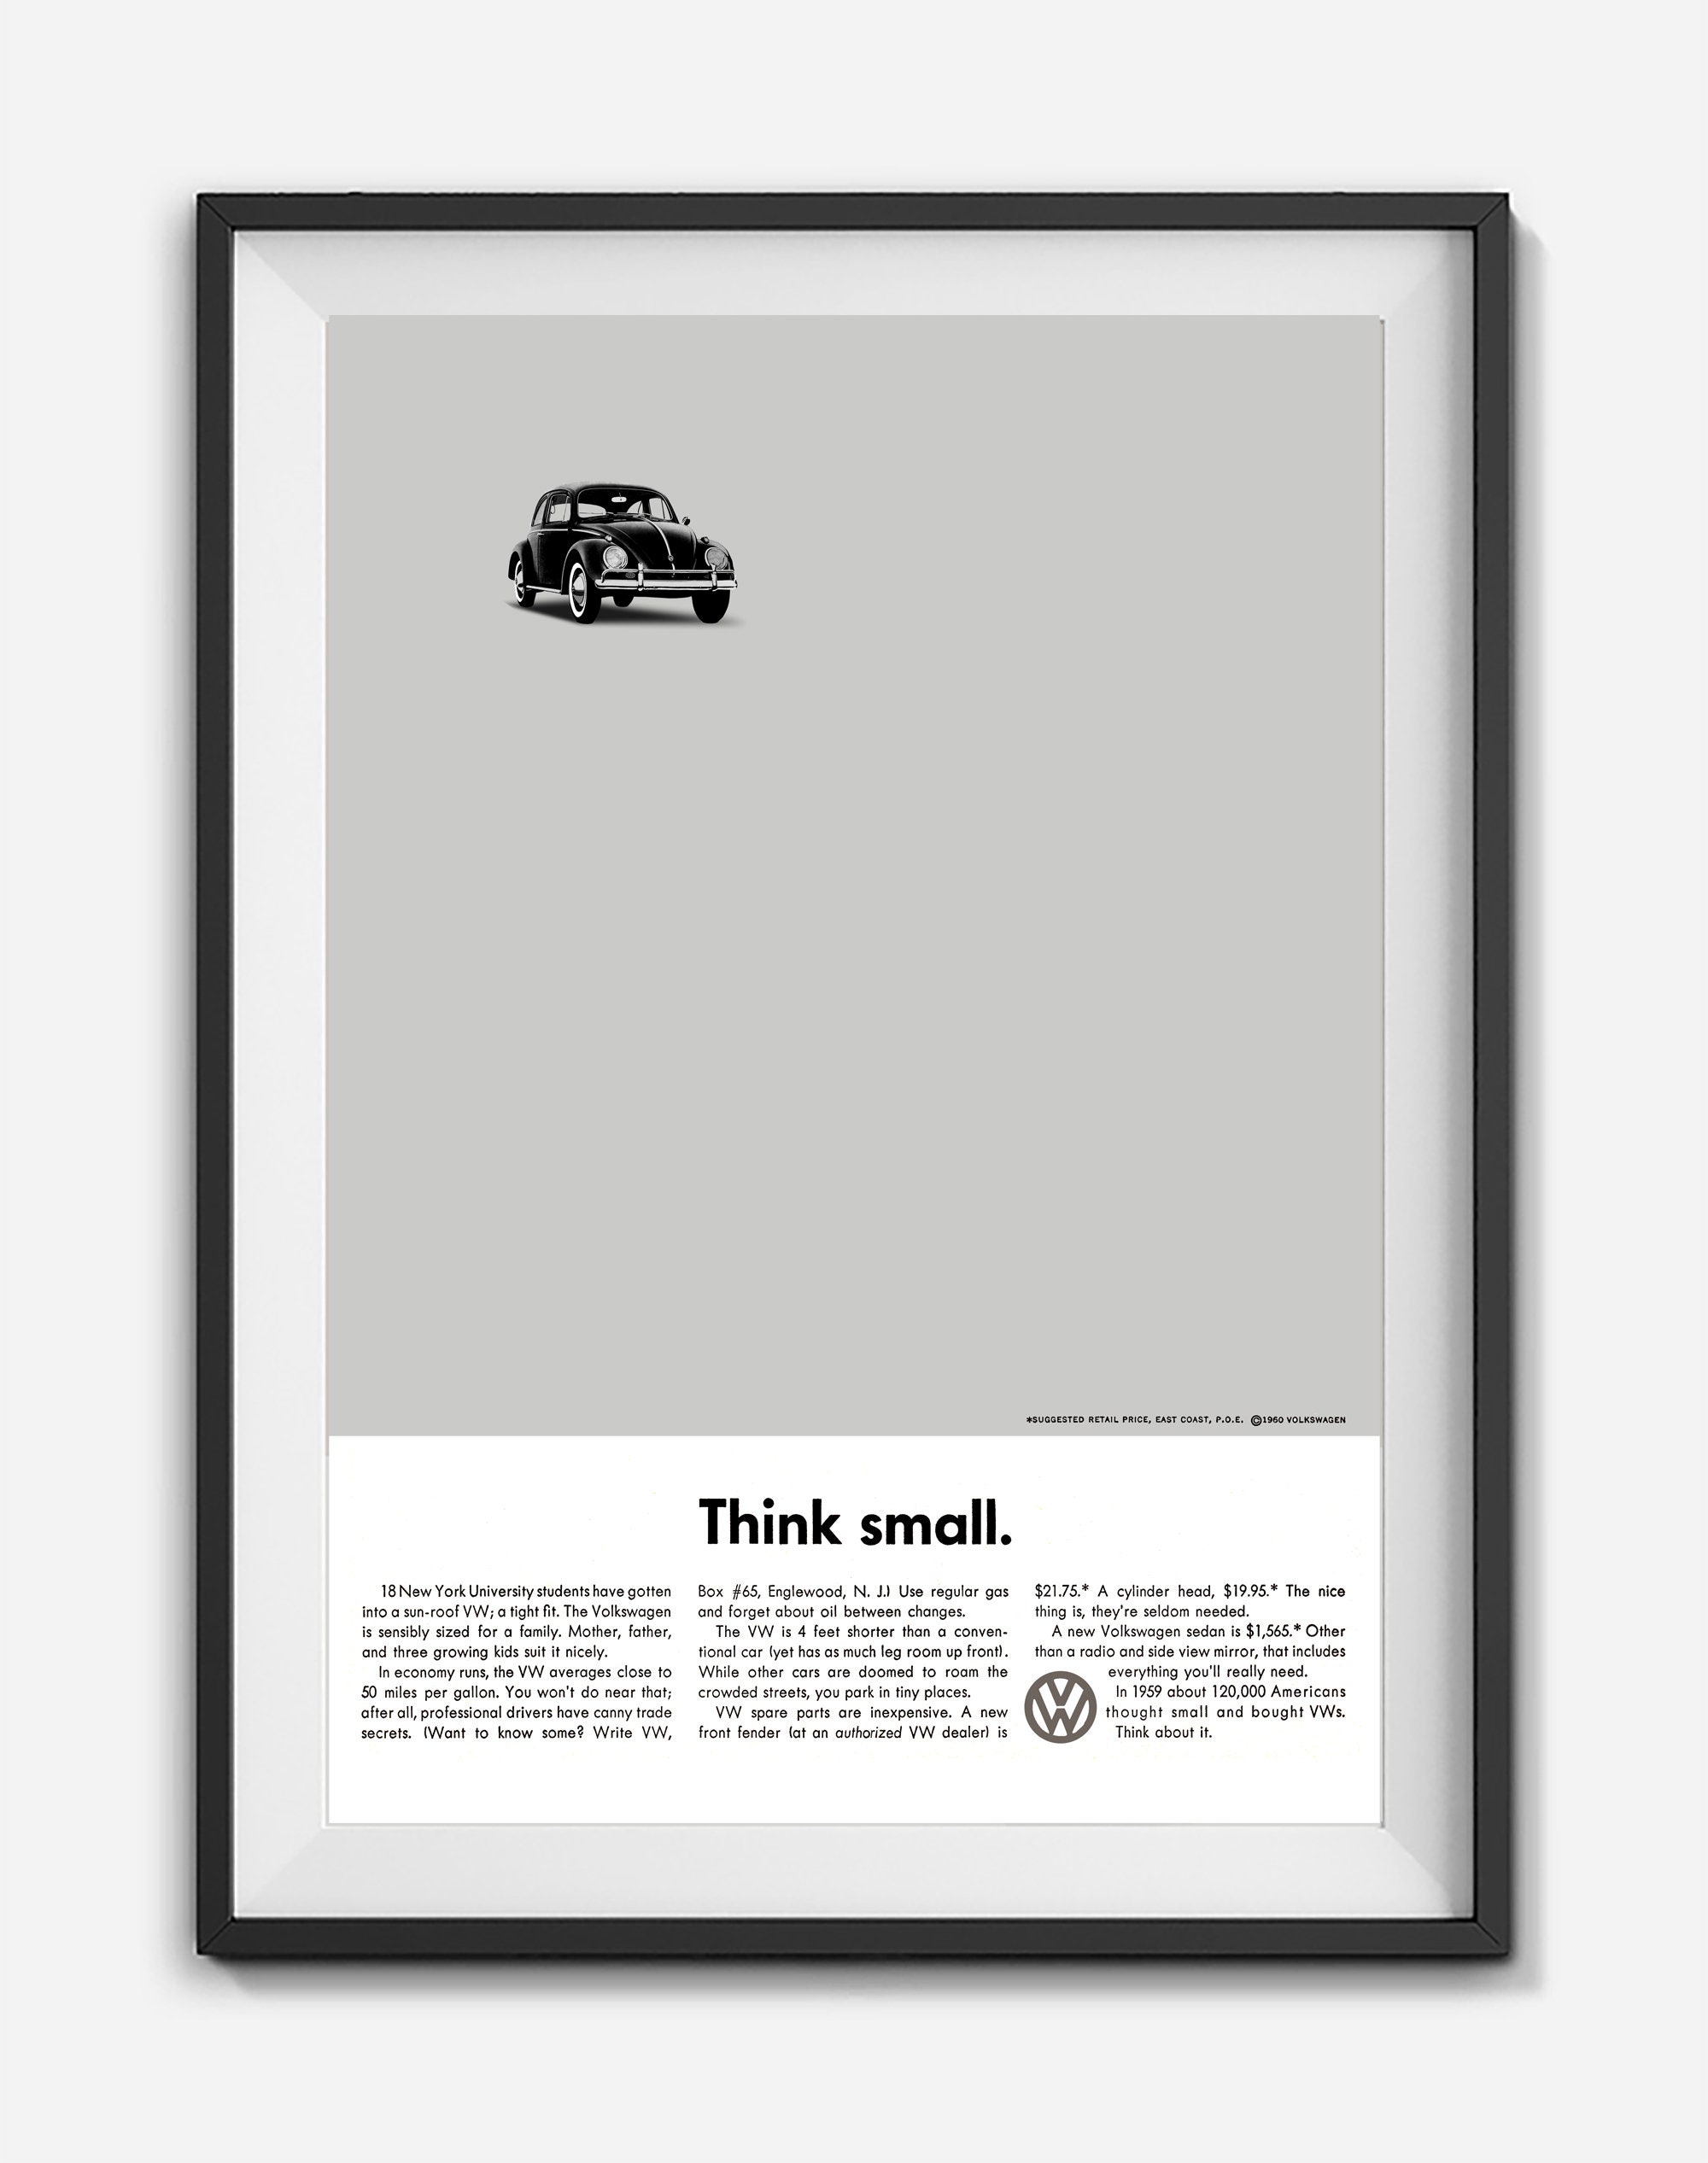 VW Think Small Advertisement Restored and Remastered image